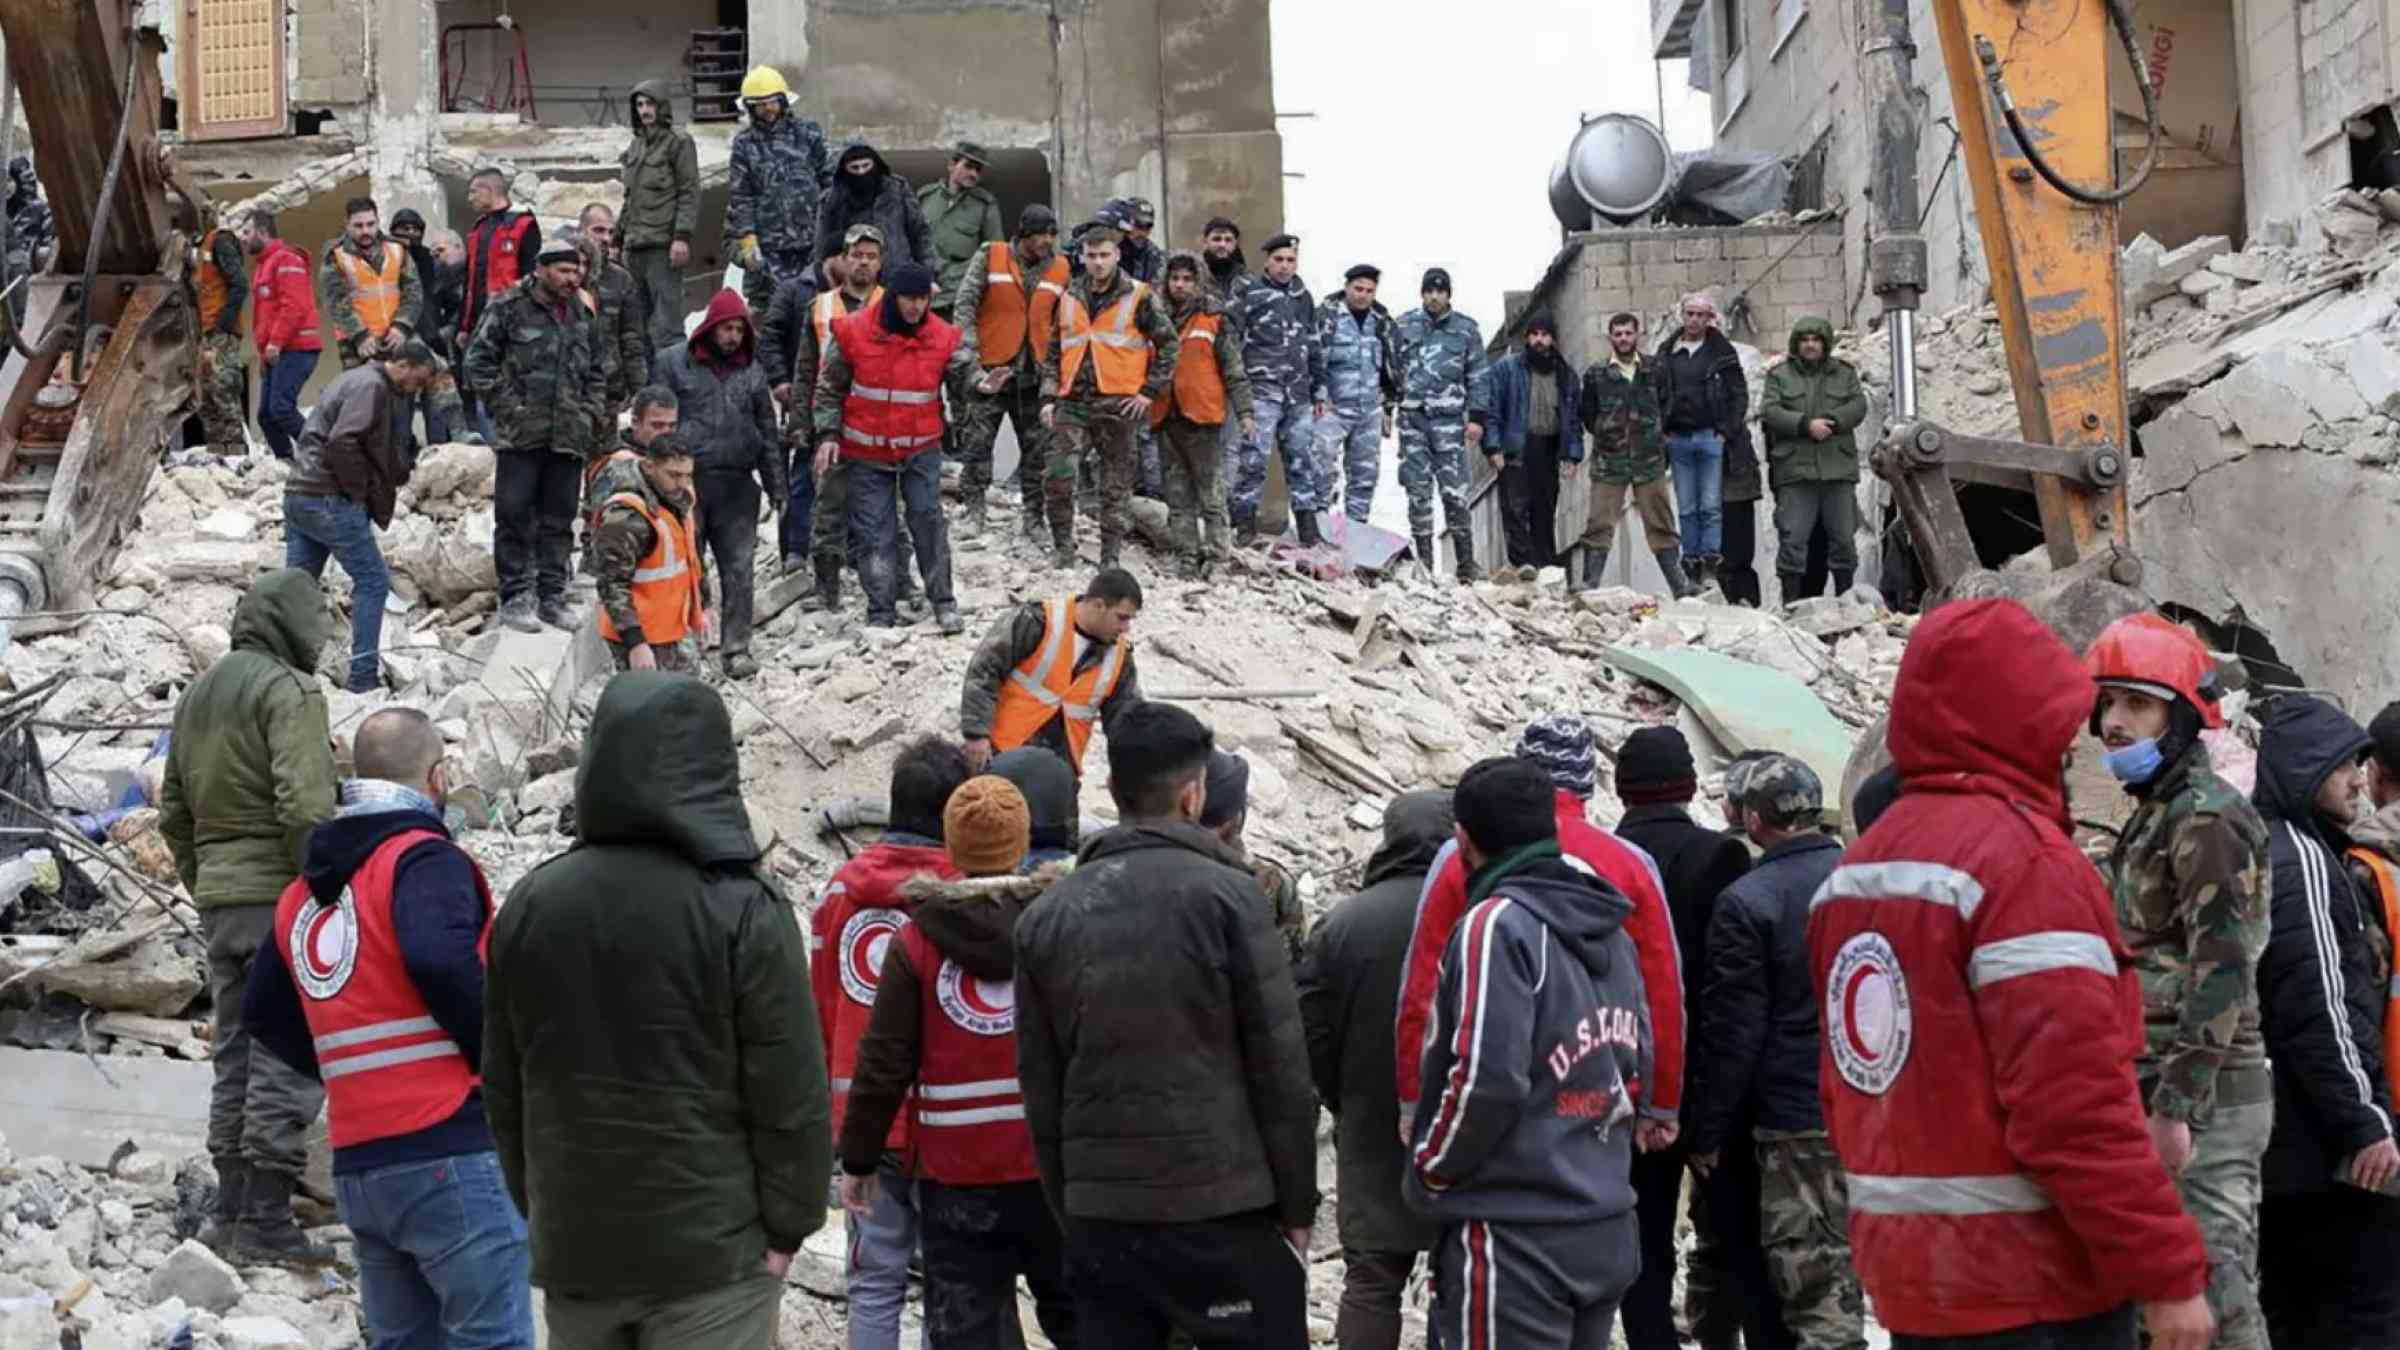 Rescuers search for survivors at the site of a collapsed building in Hama, Syria on 6 February 2023